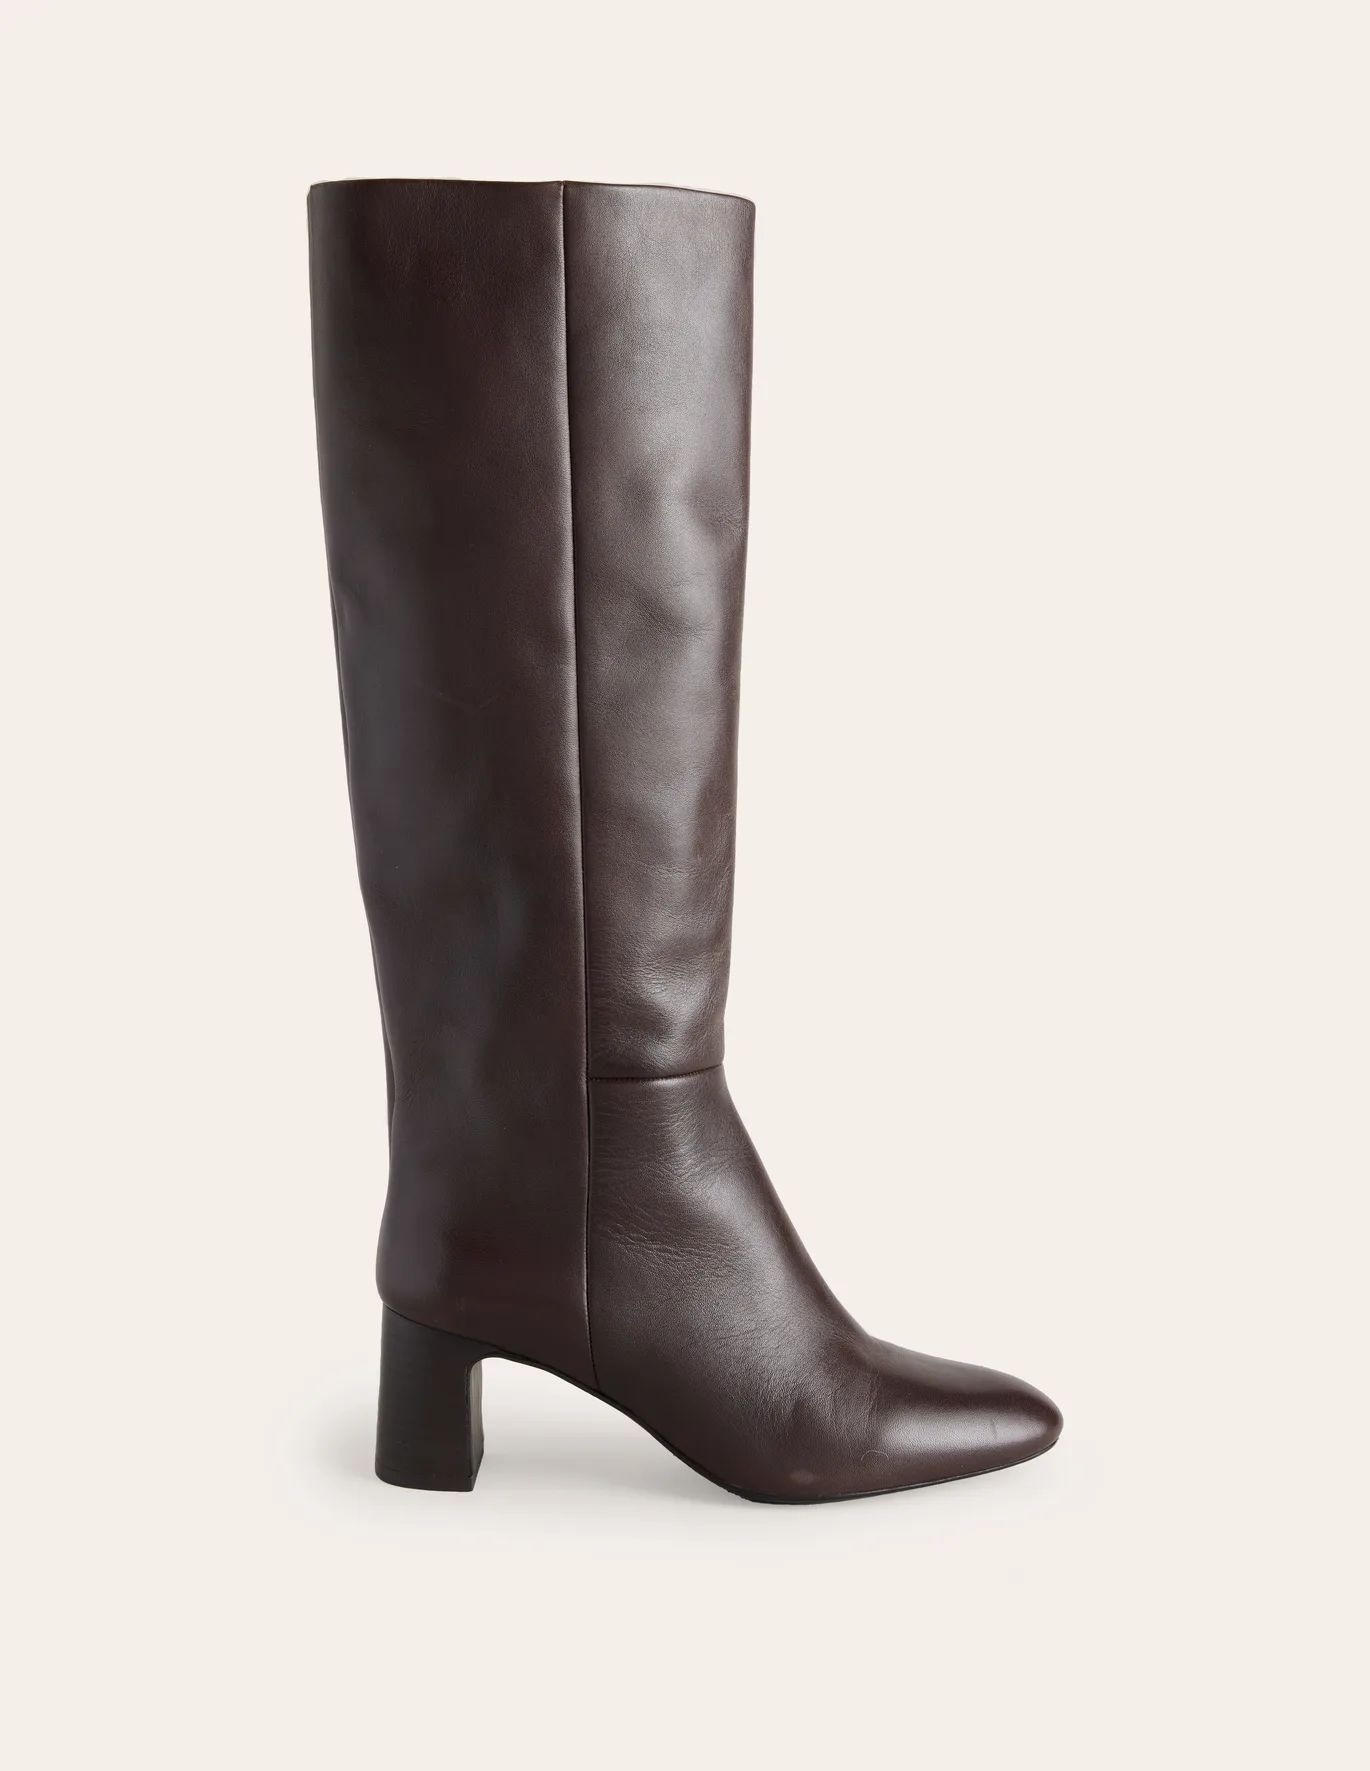 Erica Knee High Leather Boots - Chocolate Leather | Boden (UK & IE)